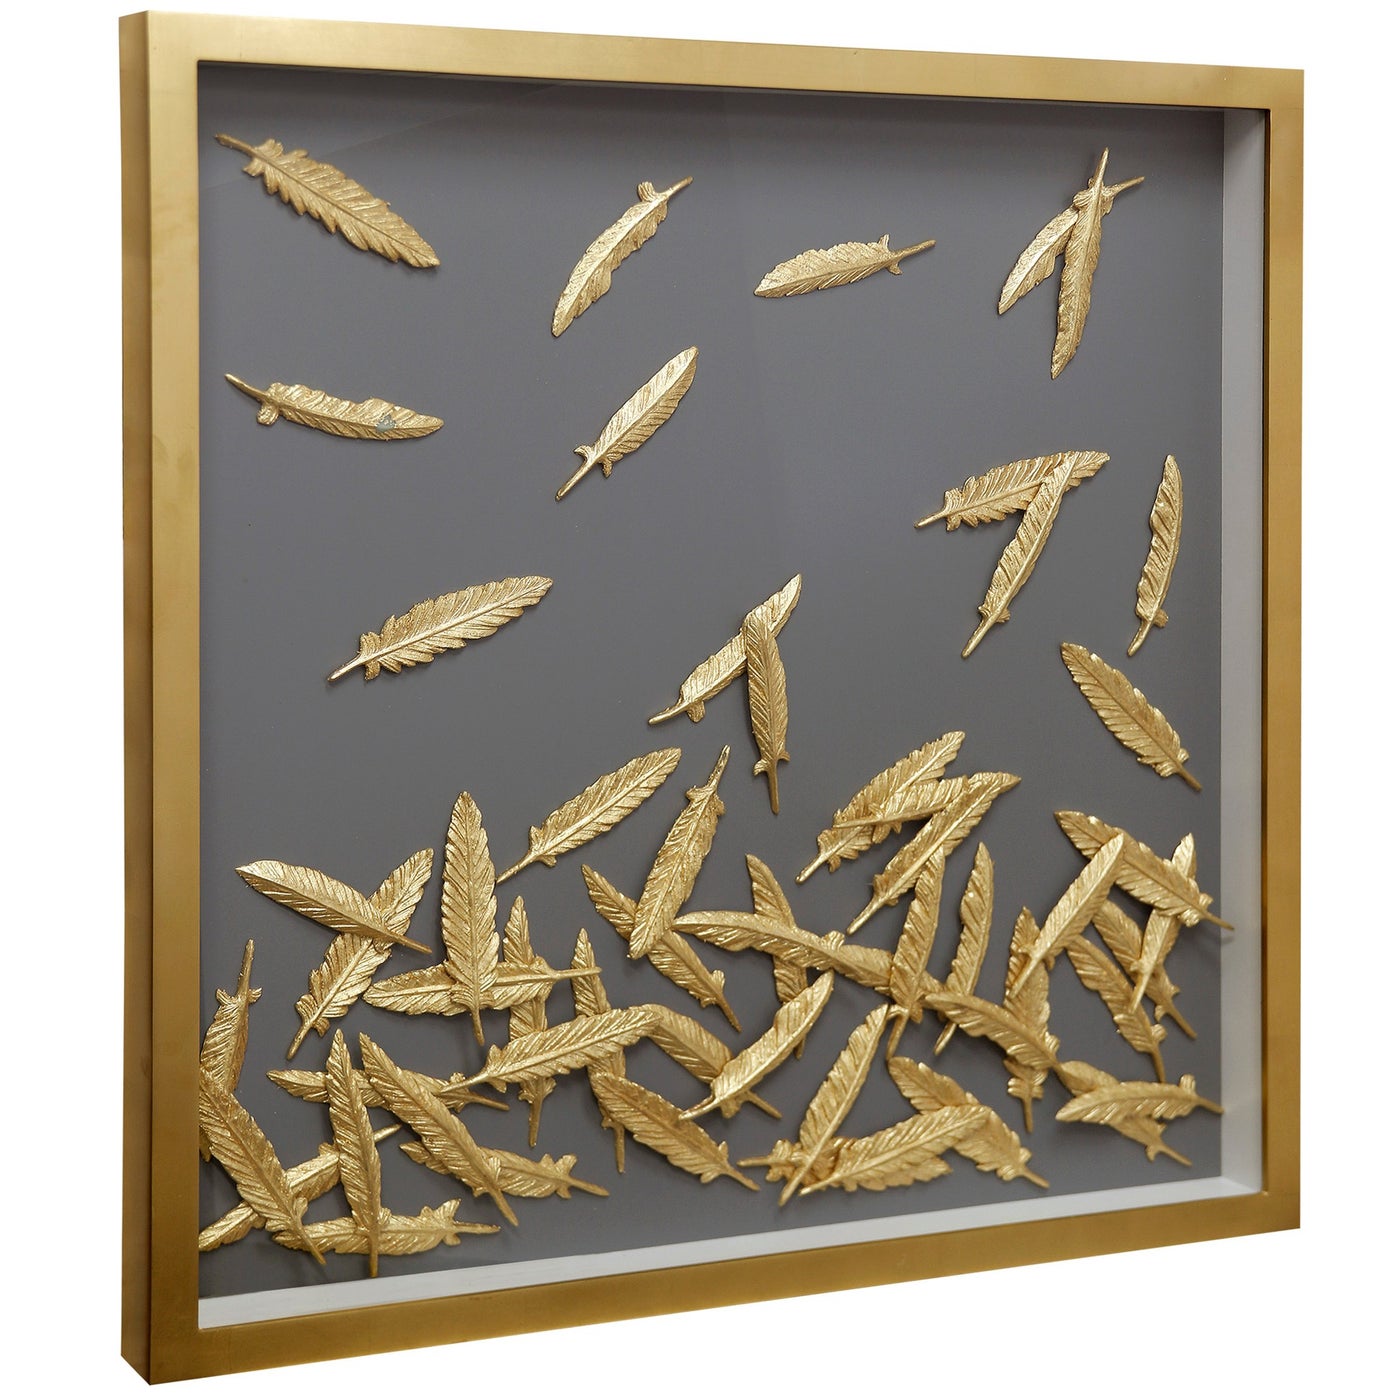 FALLING FEATHER ART, Gold Feathers in Shadow Box